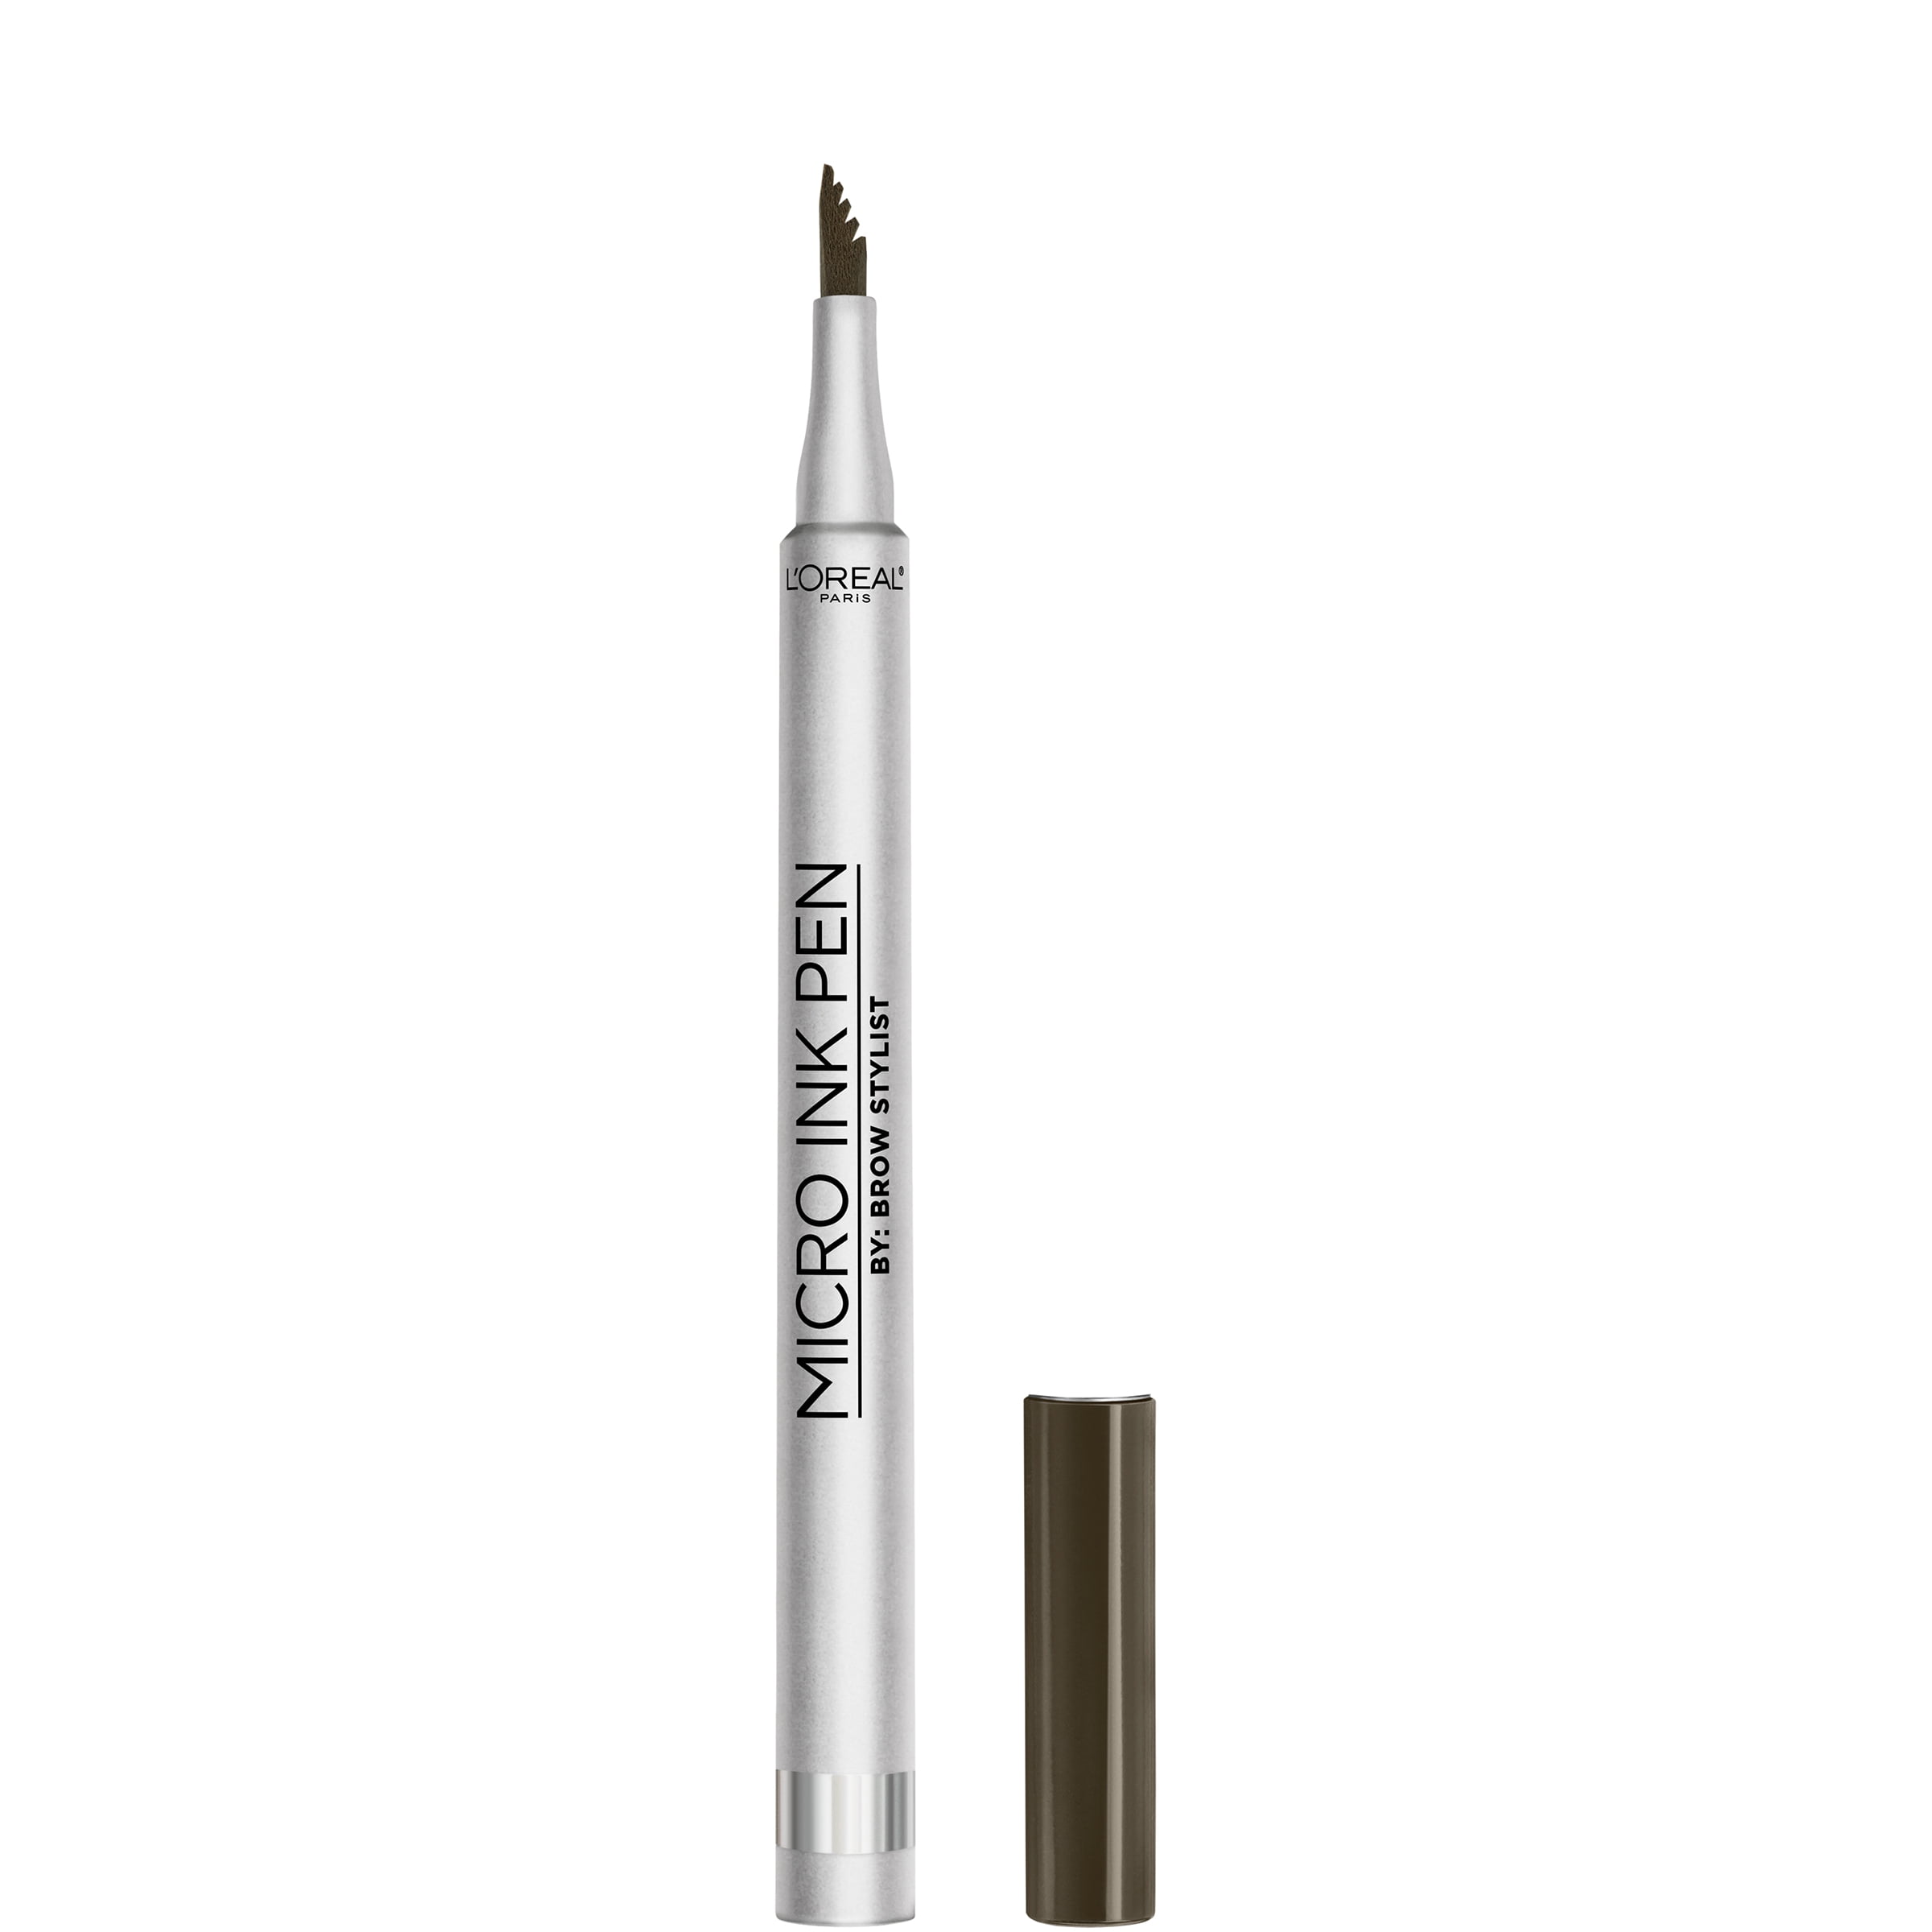 L'Oreal Paris Brow Stylist Up to 48HR Wear Micro Ink Pen,